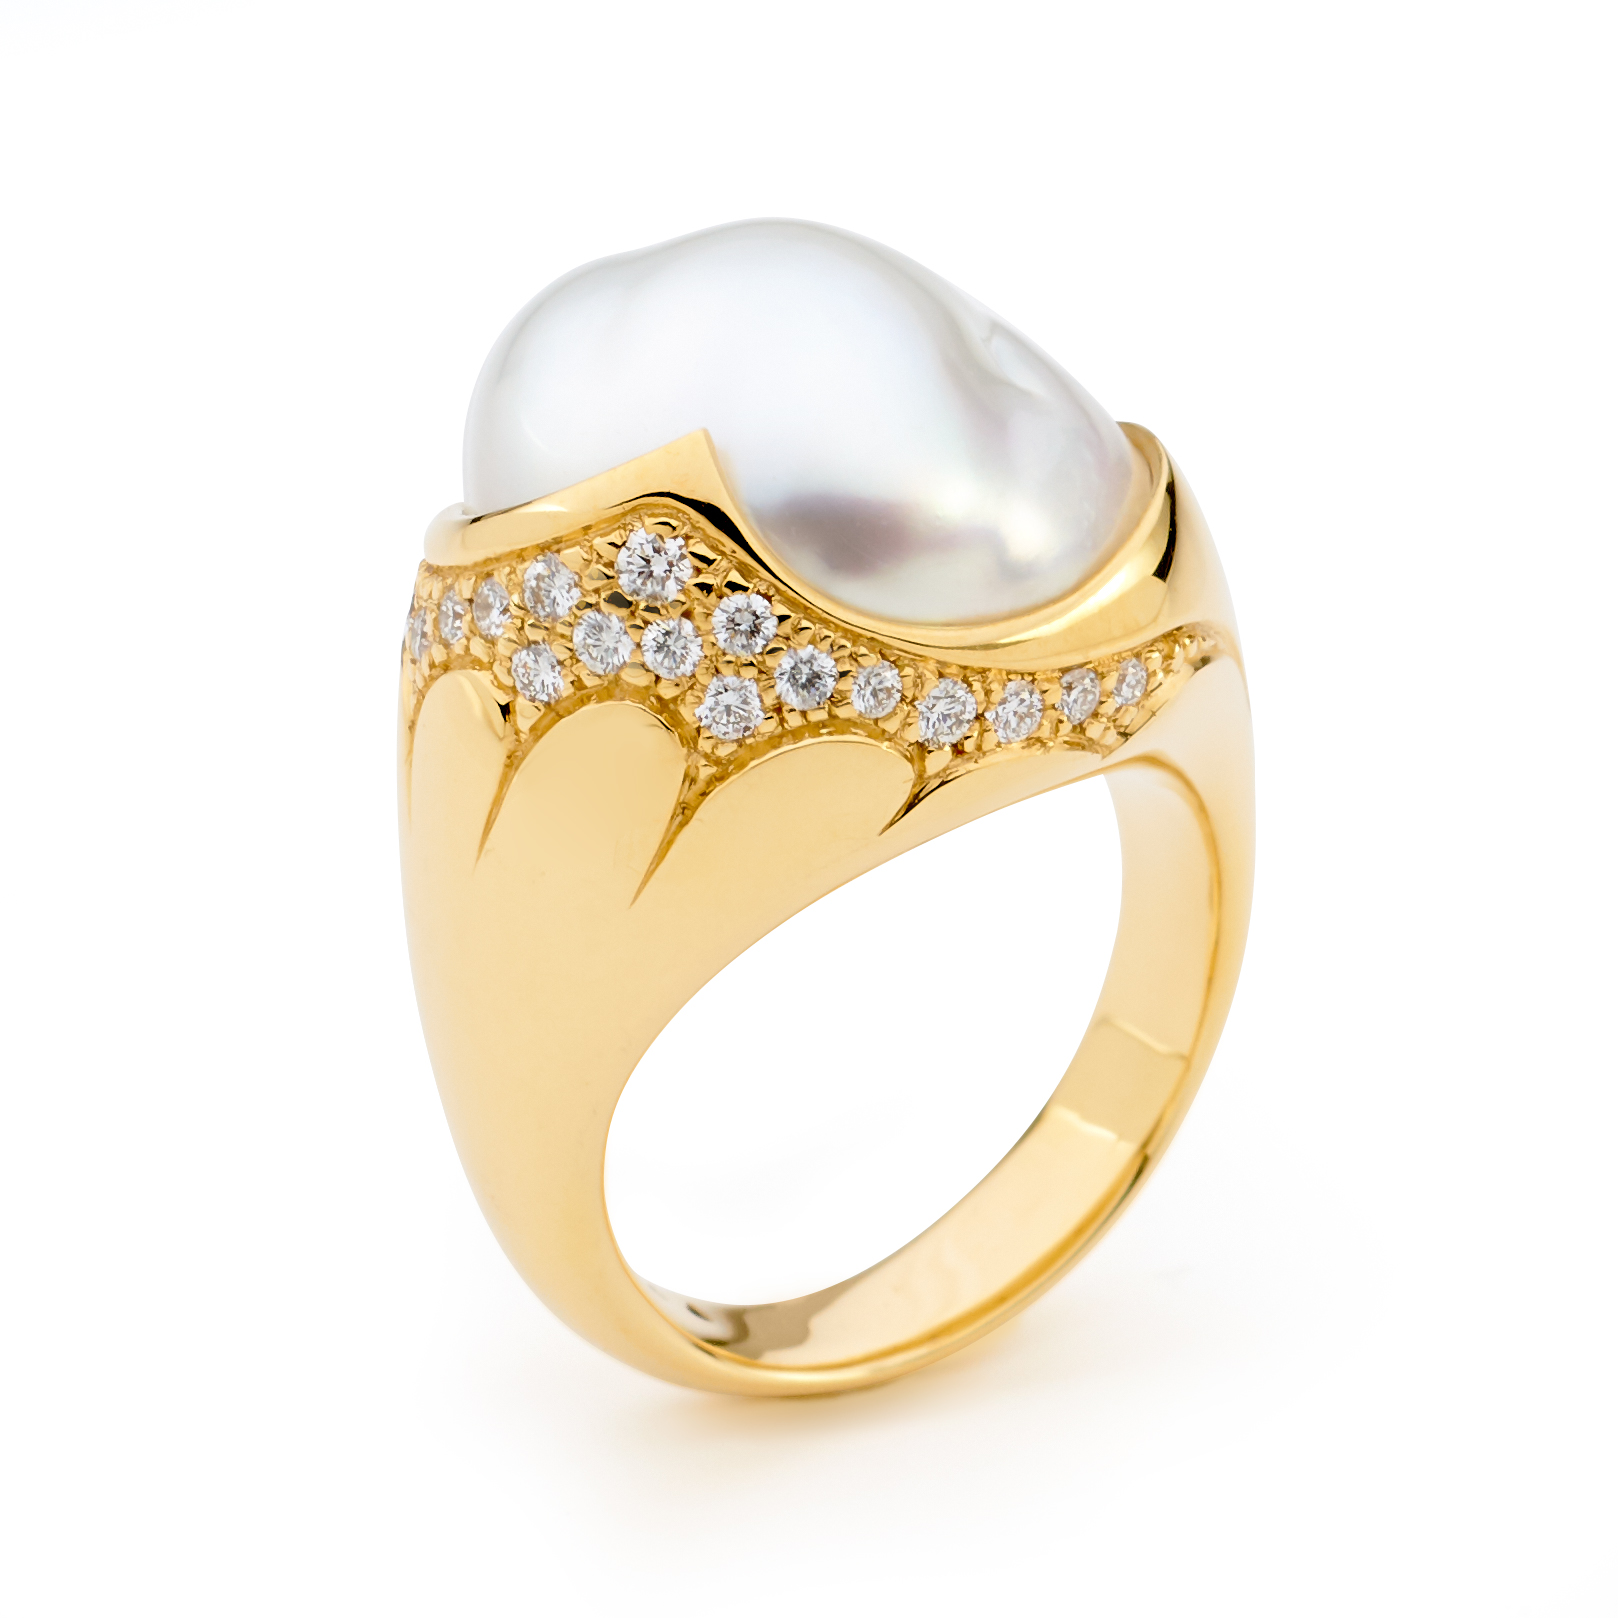 Sky Ring - Allure South Sea Pearls